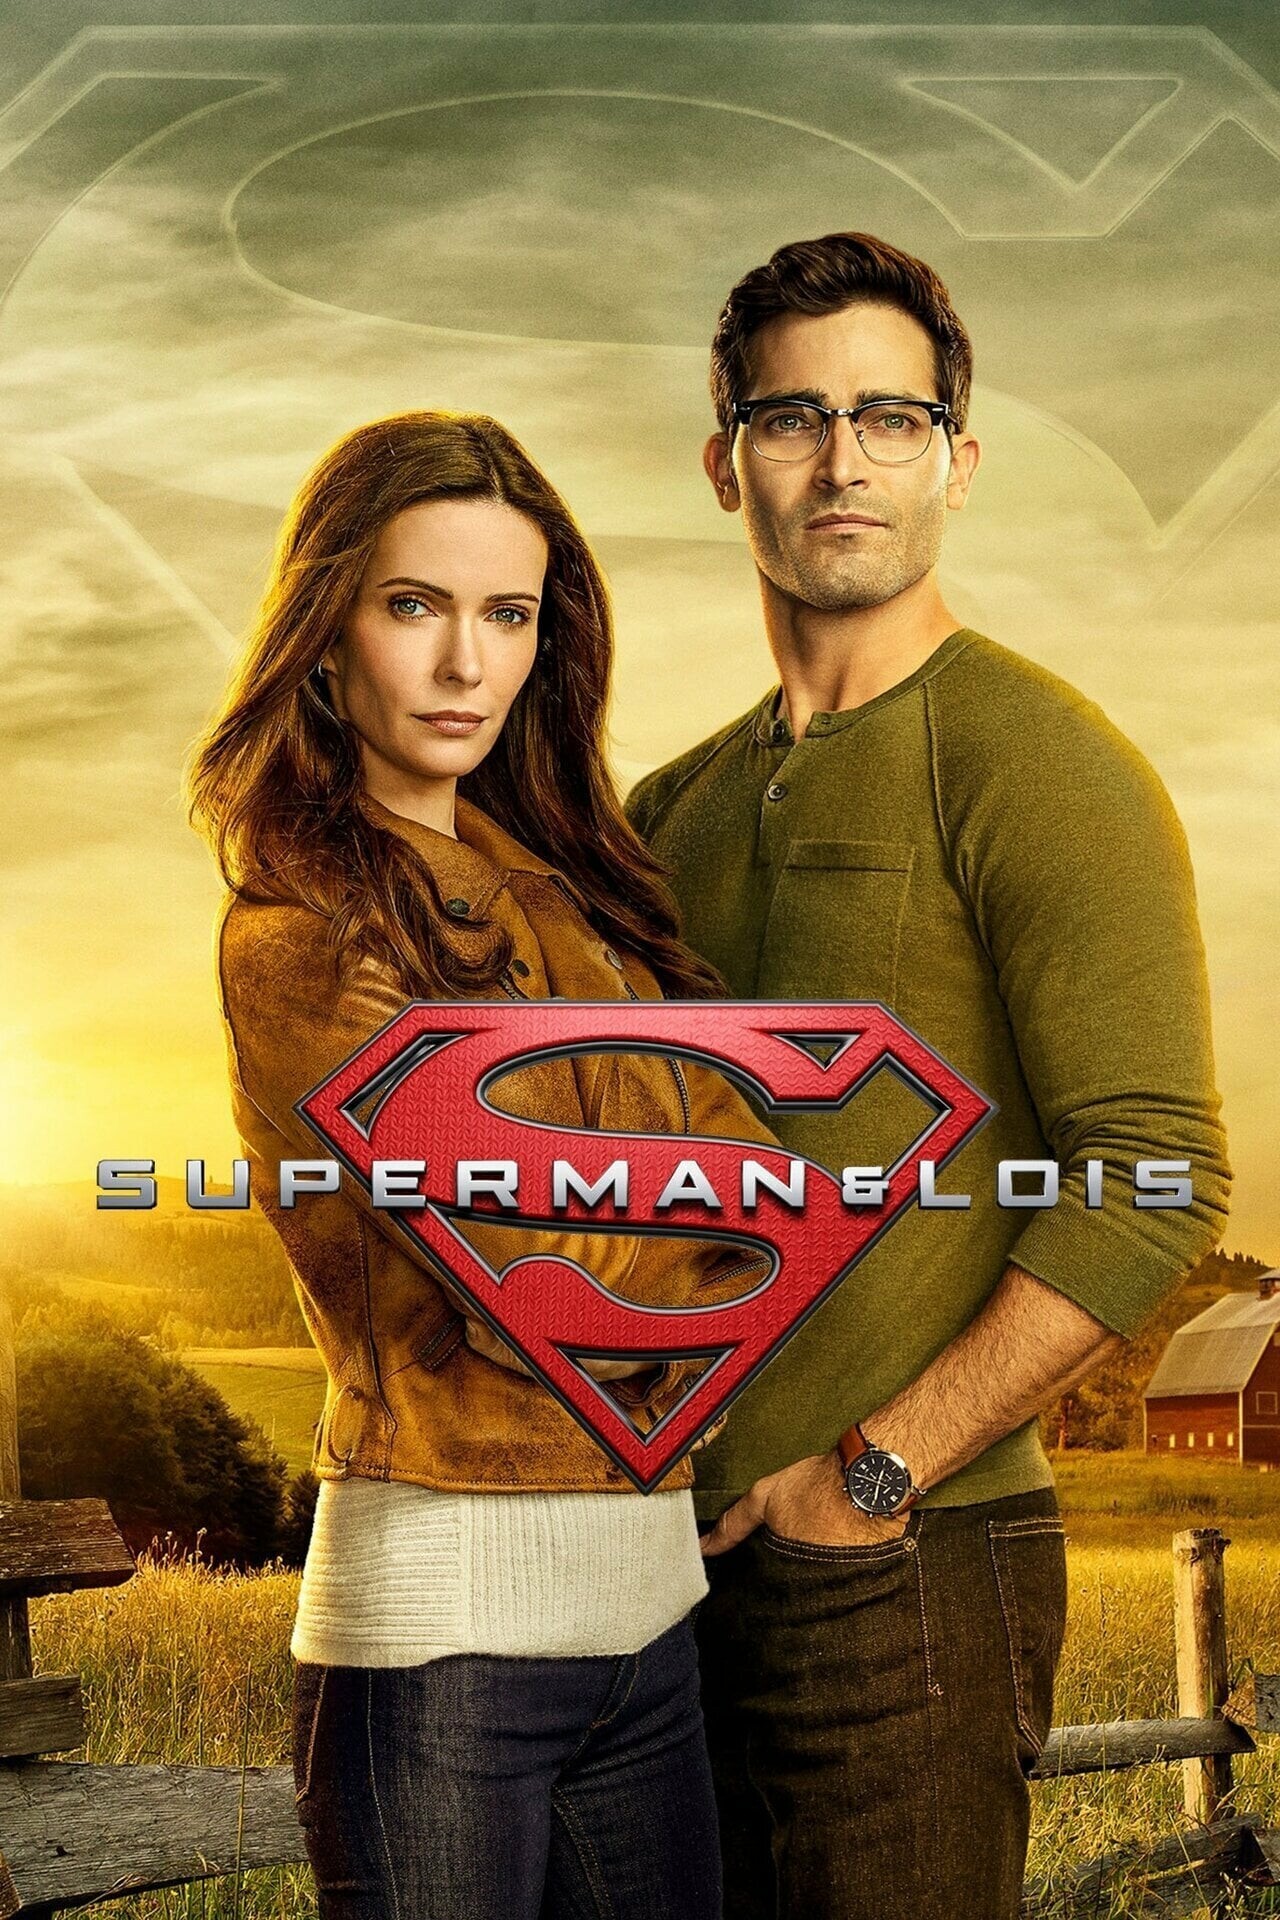 Superman and Lois (TV Series): A television show based on the DC Comics characters of the same name. 1280x1920 HD Wallpaper.